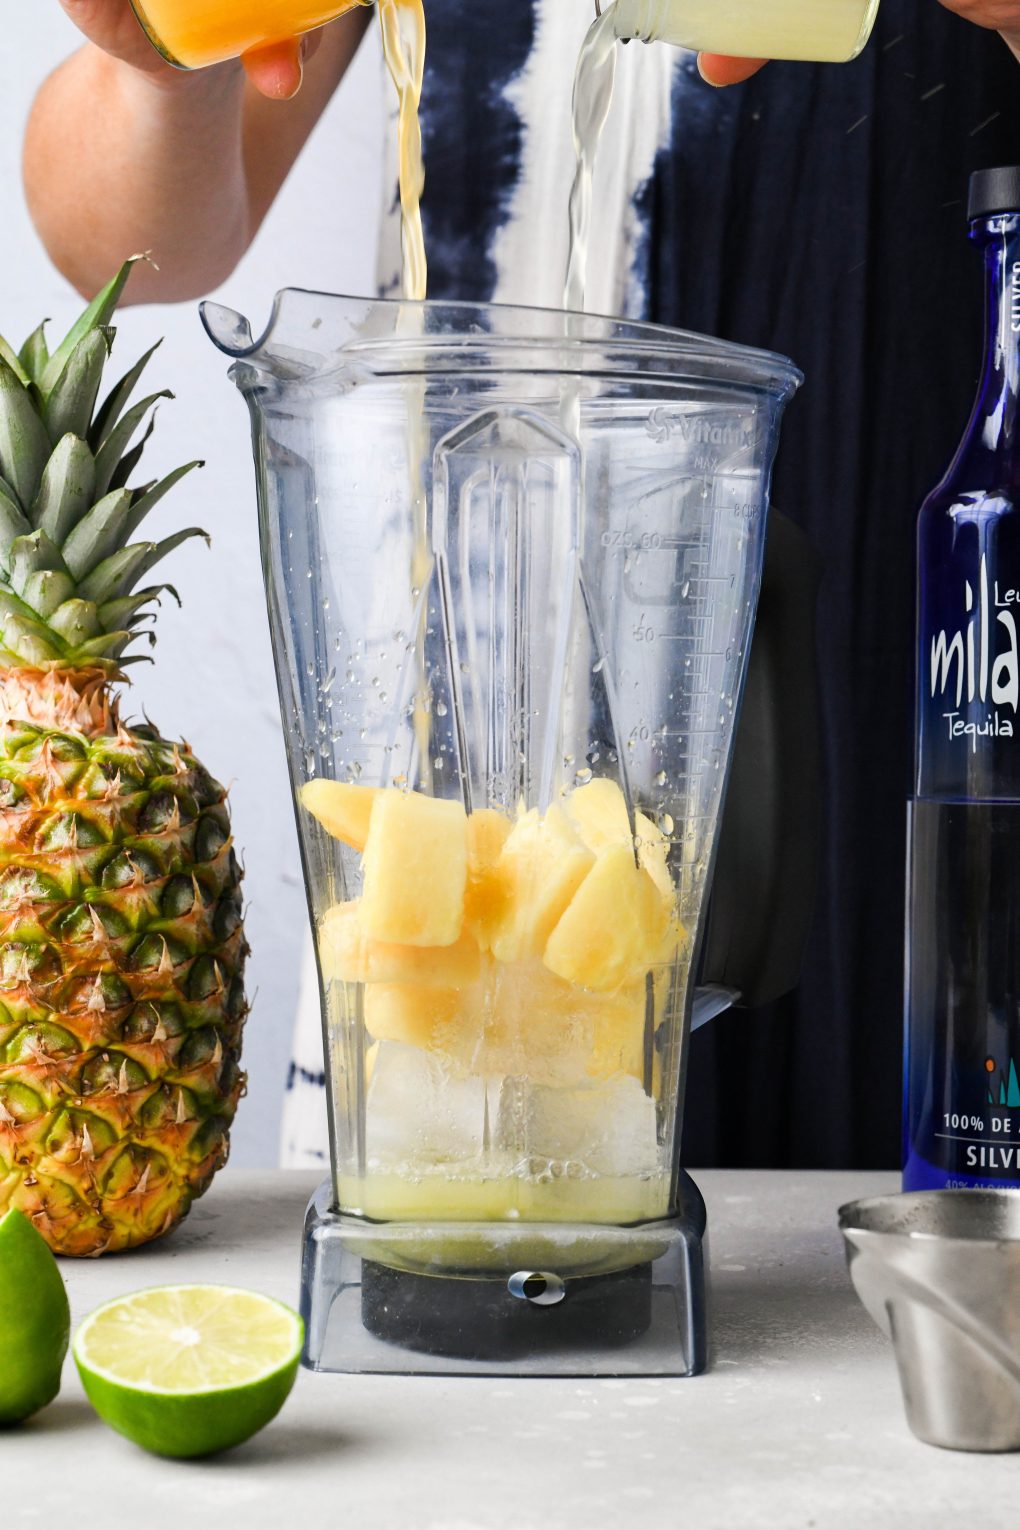 A hand pouring fresh lime and orange juice into a blender with frozen pineapple and ice. On a light background next to a fresh pineapple and a bottle of tequila.